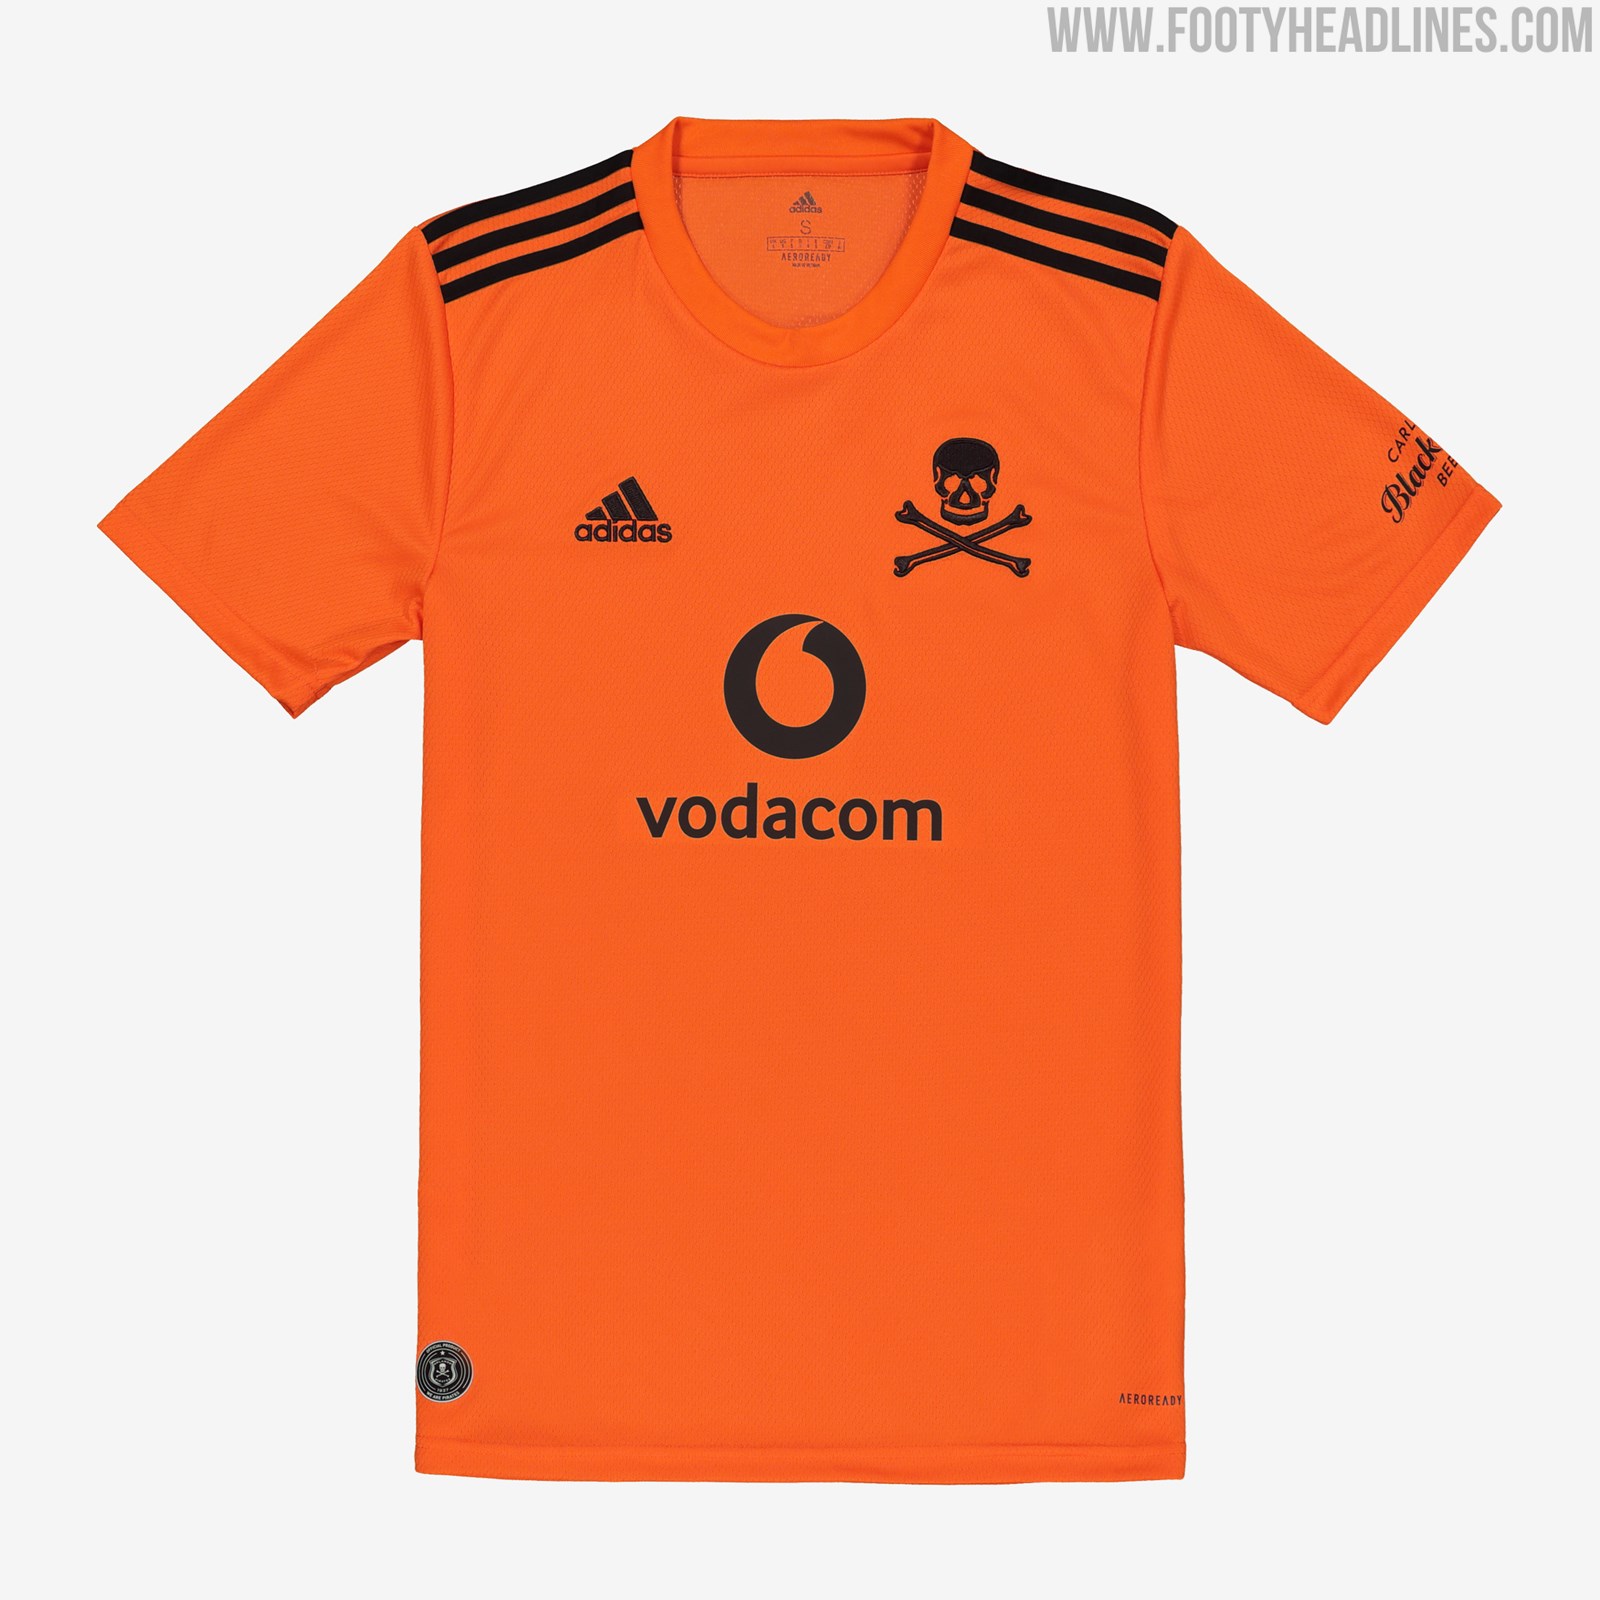 Looking for this Orlando Pirates 20-21 Home kit in an XL. Willing